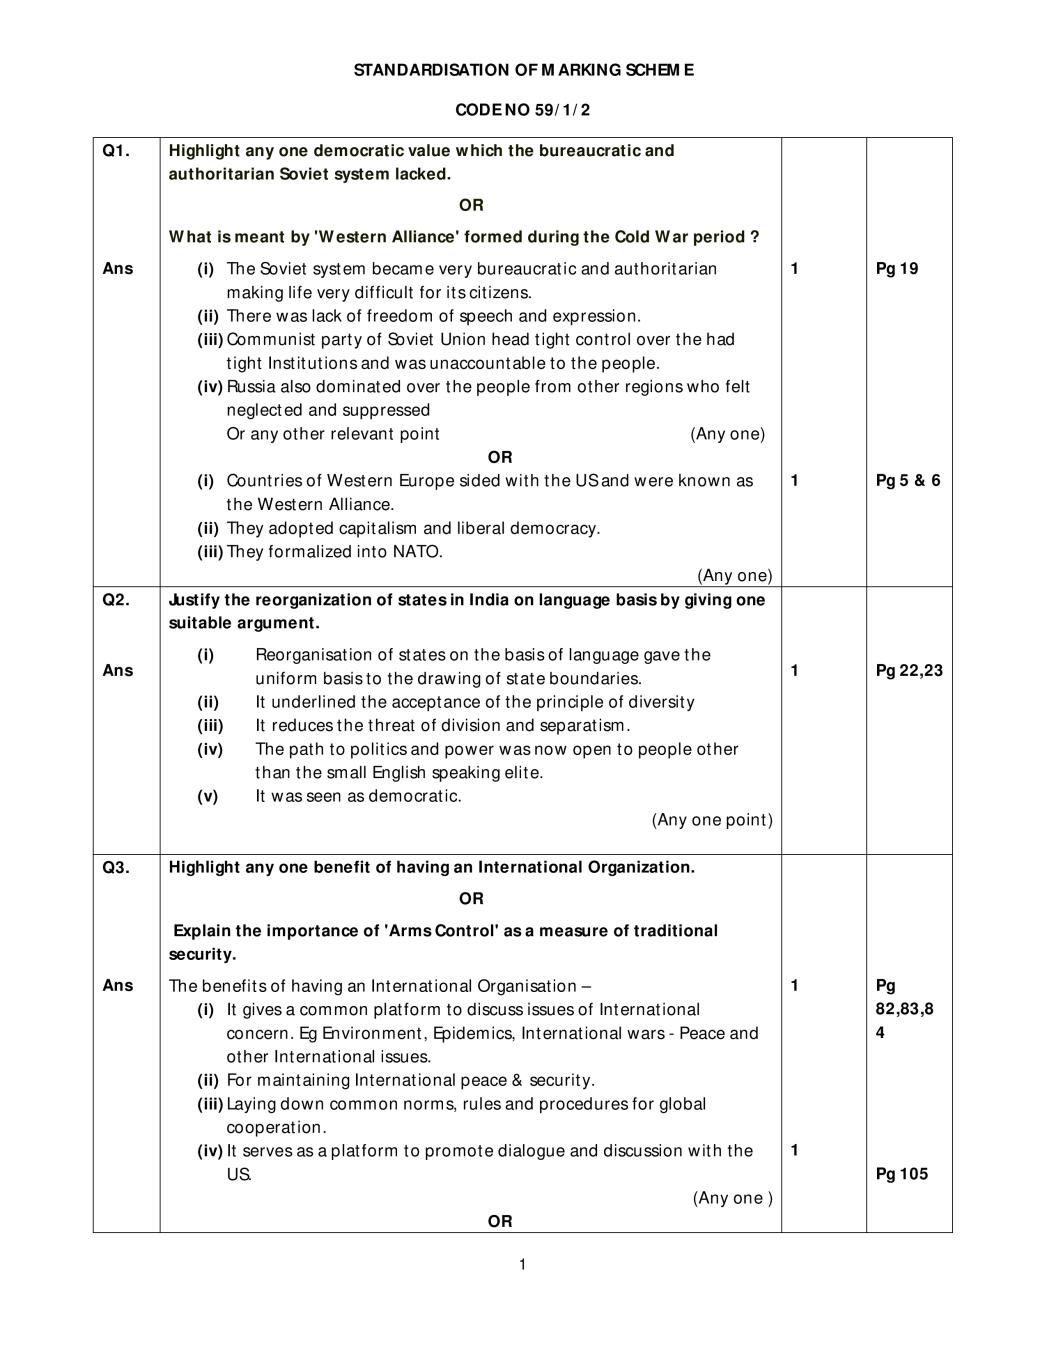 CBSE Class 12 Political Science Question Paper 2019 Set 1 Solutions - Page 1